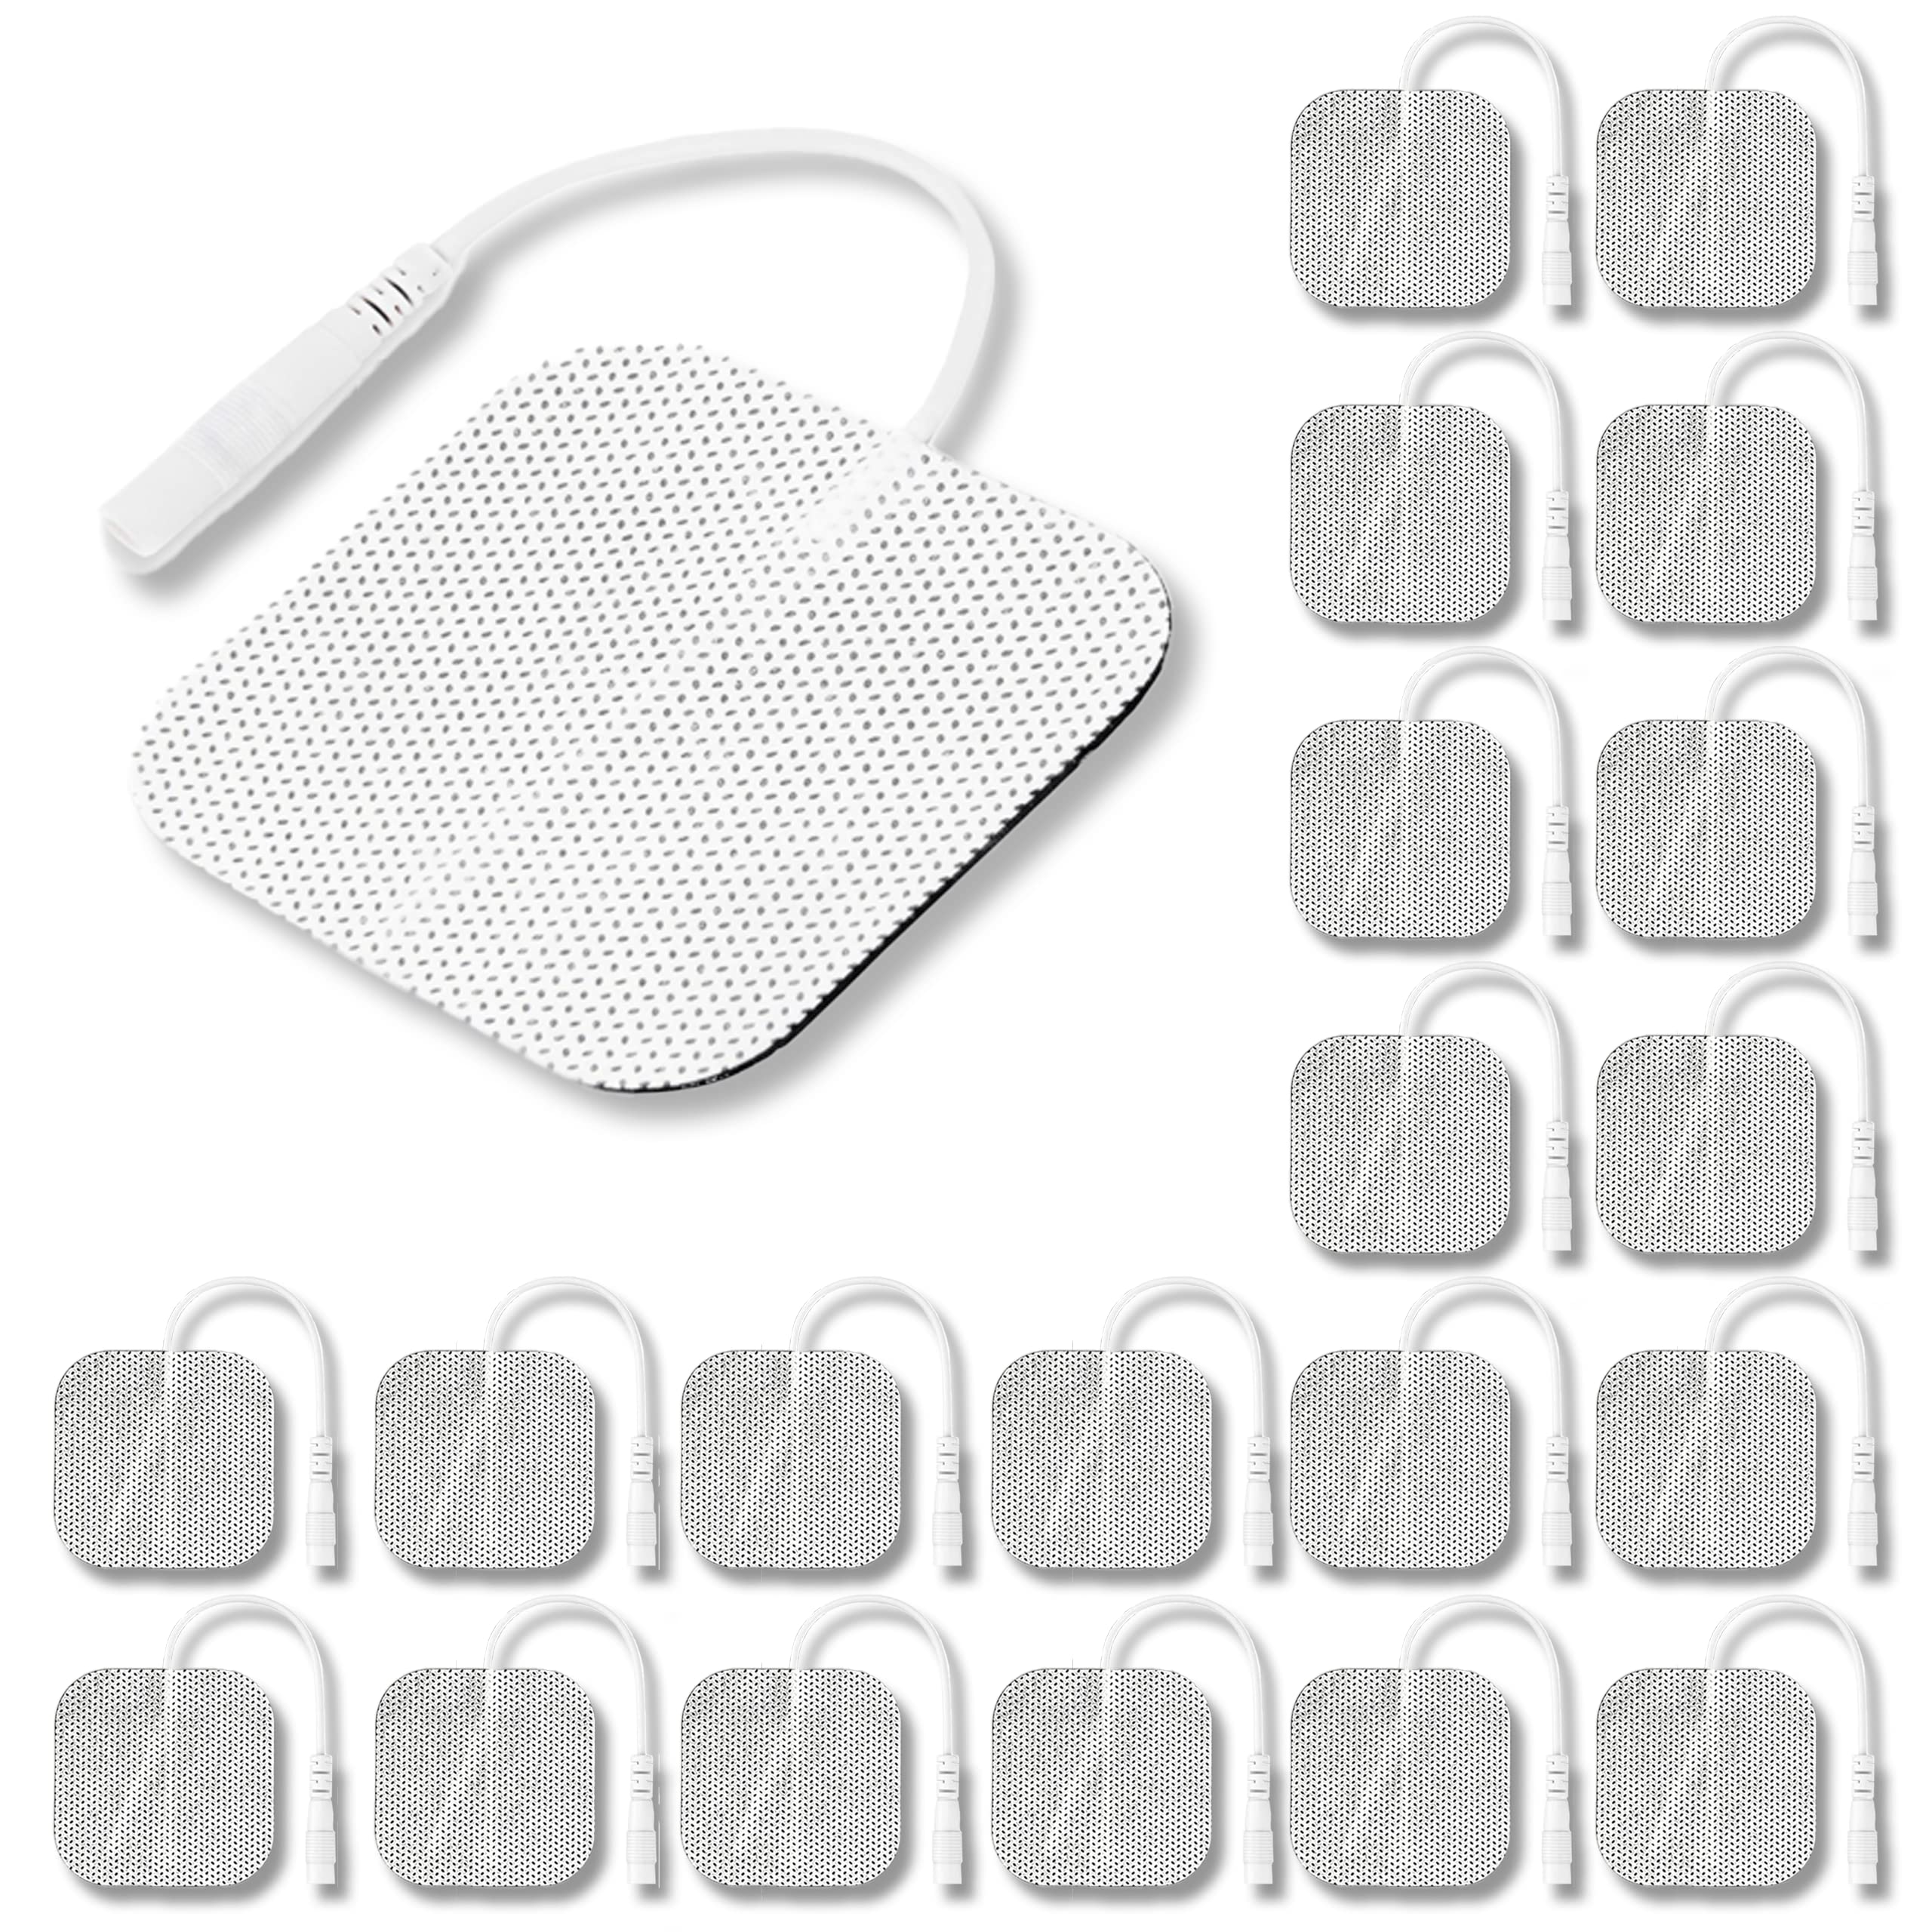 Syrtenty TENS Unit Replacement Pads - 1.5'' x 1.5 8 pcs Electrode Squares  Stimulator Pad Set with Upgrated Self Stick Performance and Non-Irritating